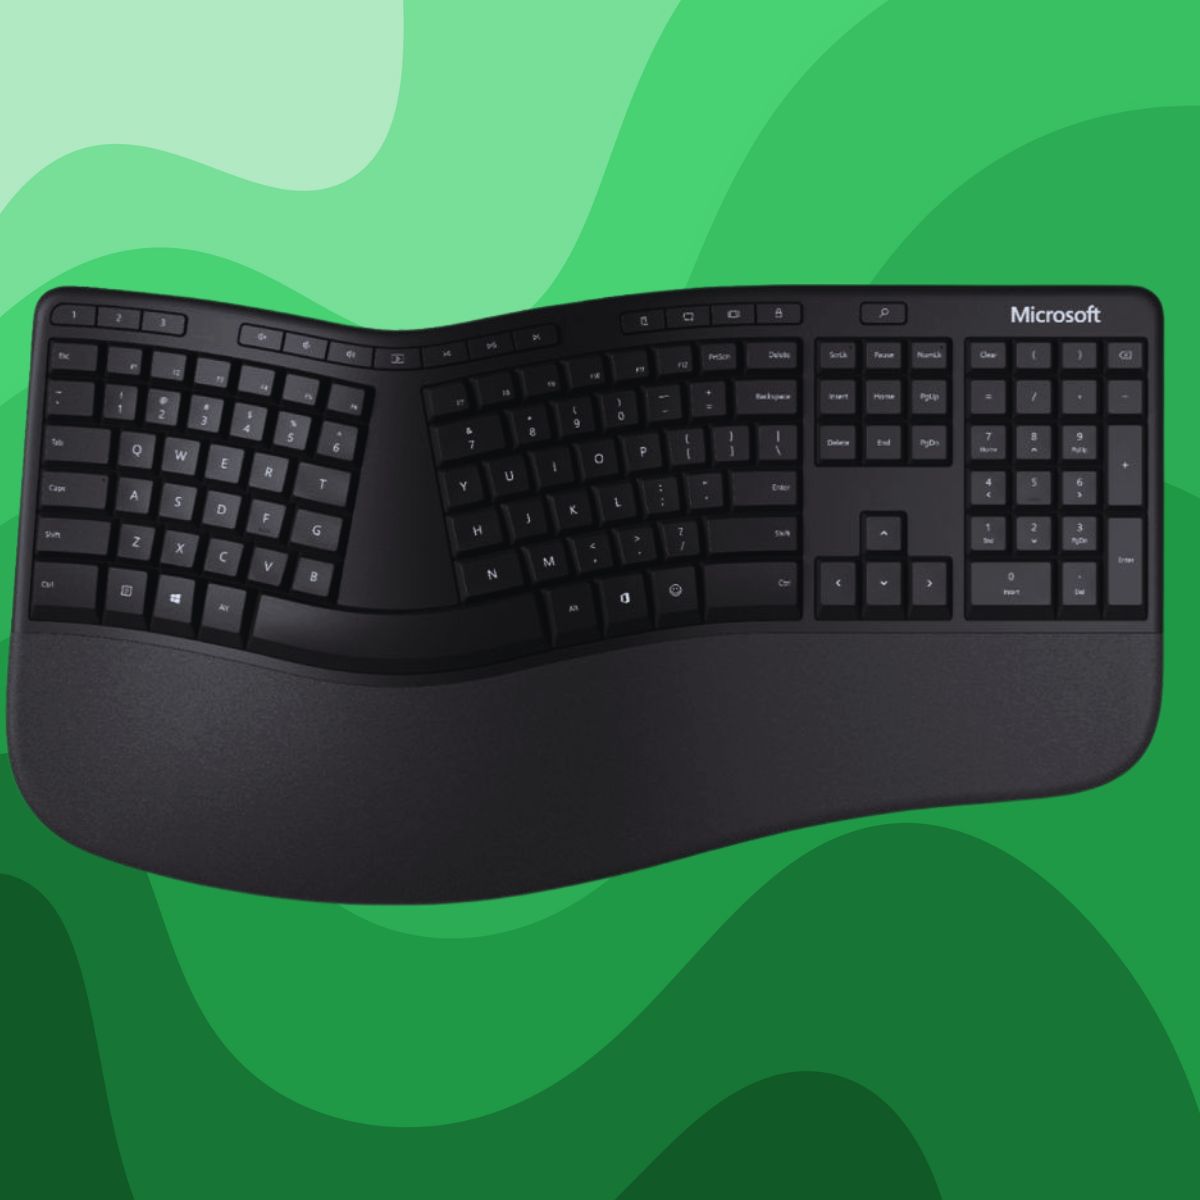 Better ergonomics on the keyboard is one of laptop accessories